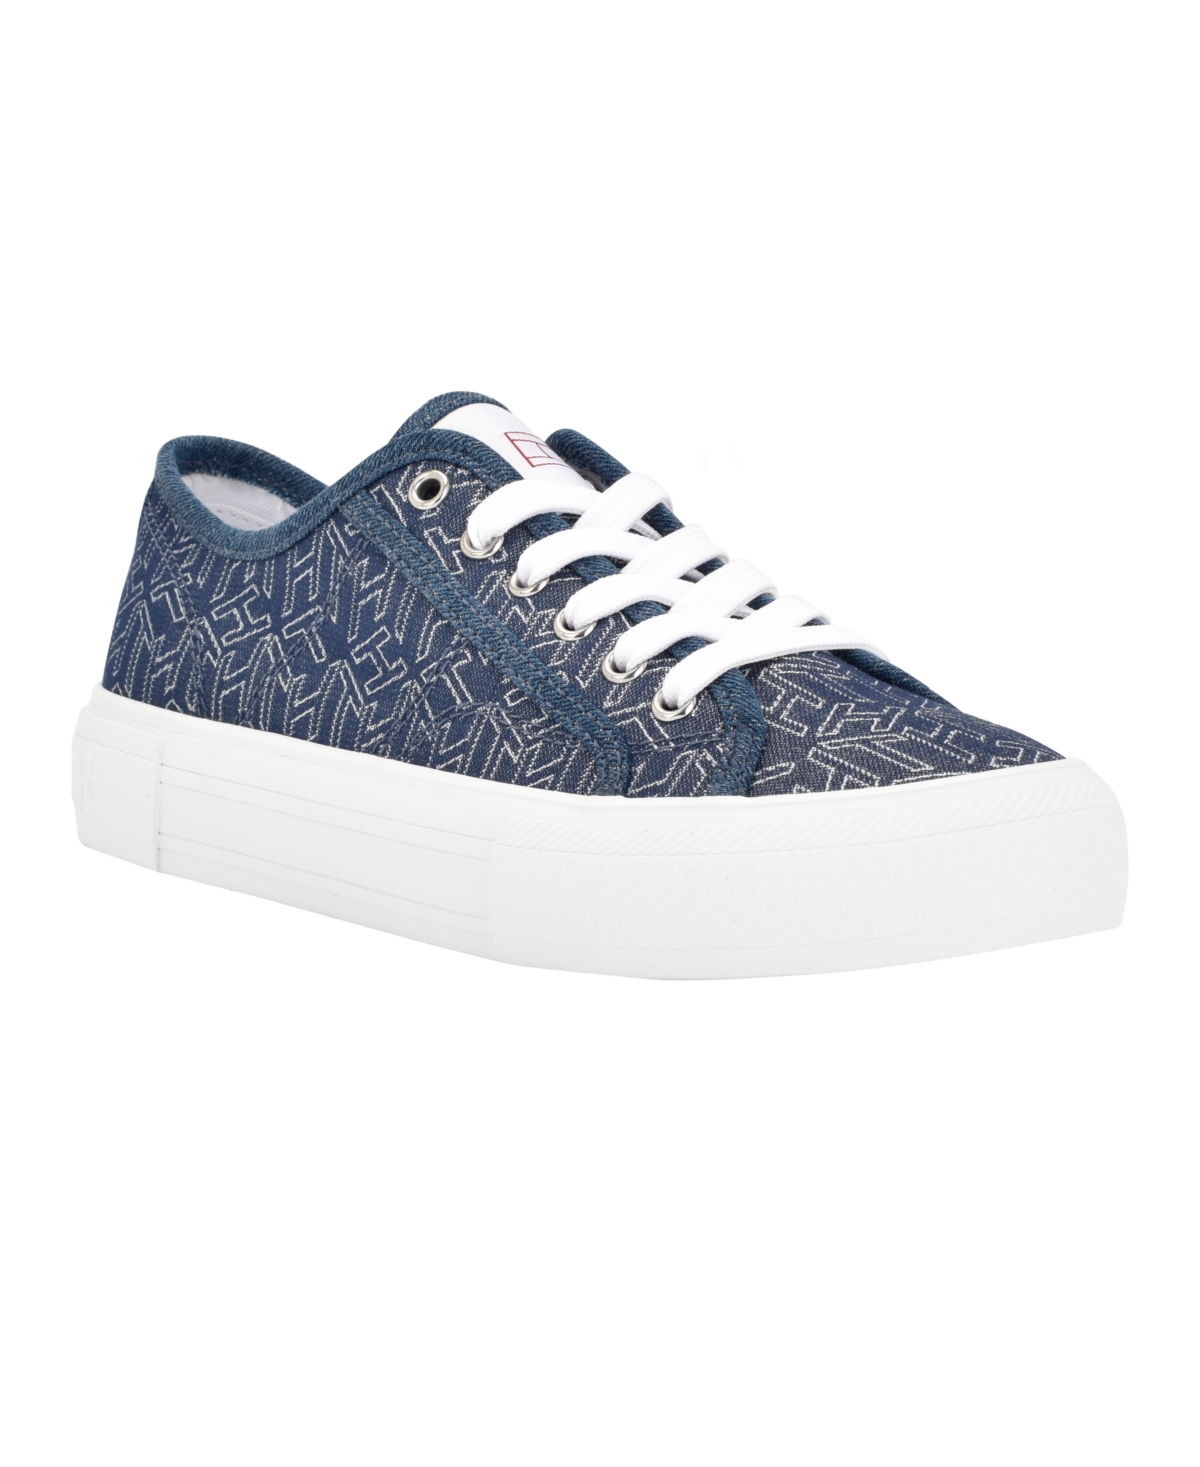 UPC 197016282954 product image for Tommy Hilfiger Women's Alessy Casual Lace Up Sneakers Women's Shoes | upcitemdb.com